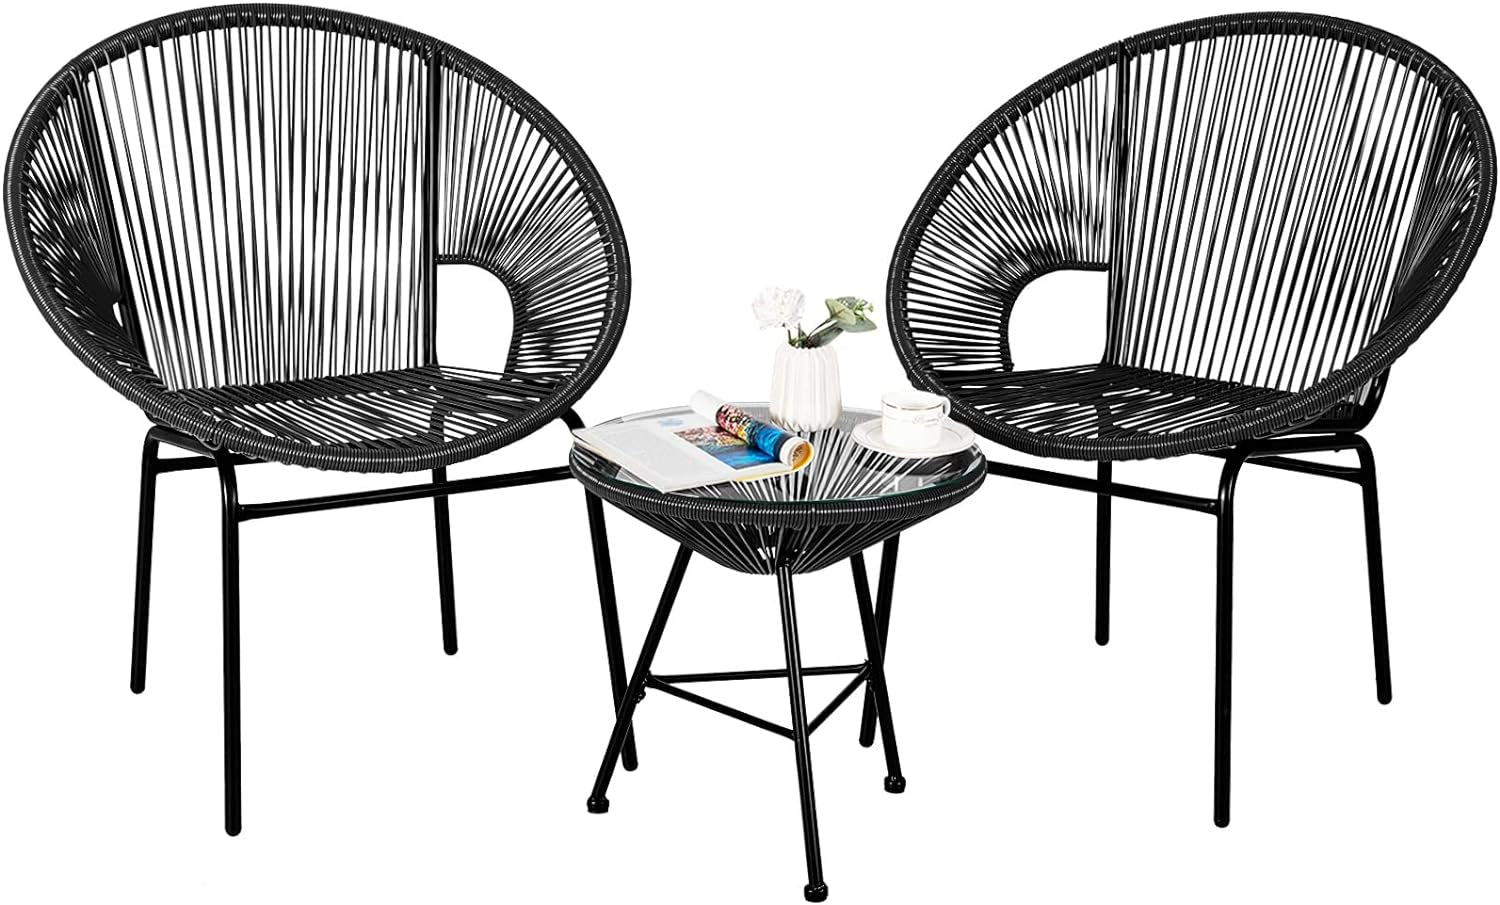 3 Piece All Weather Bistro Set for Patio